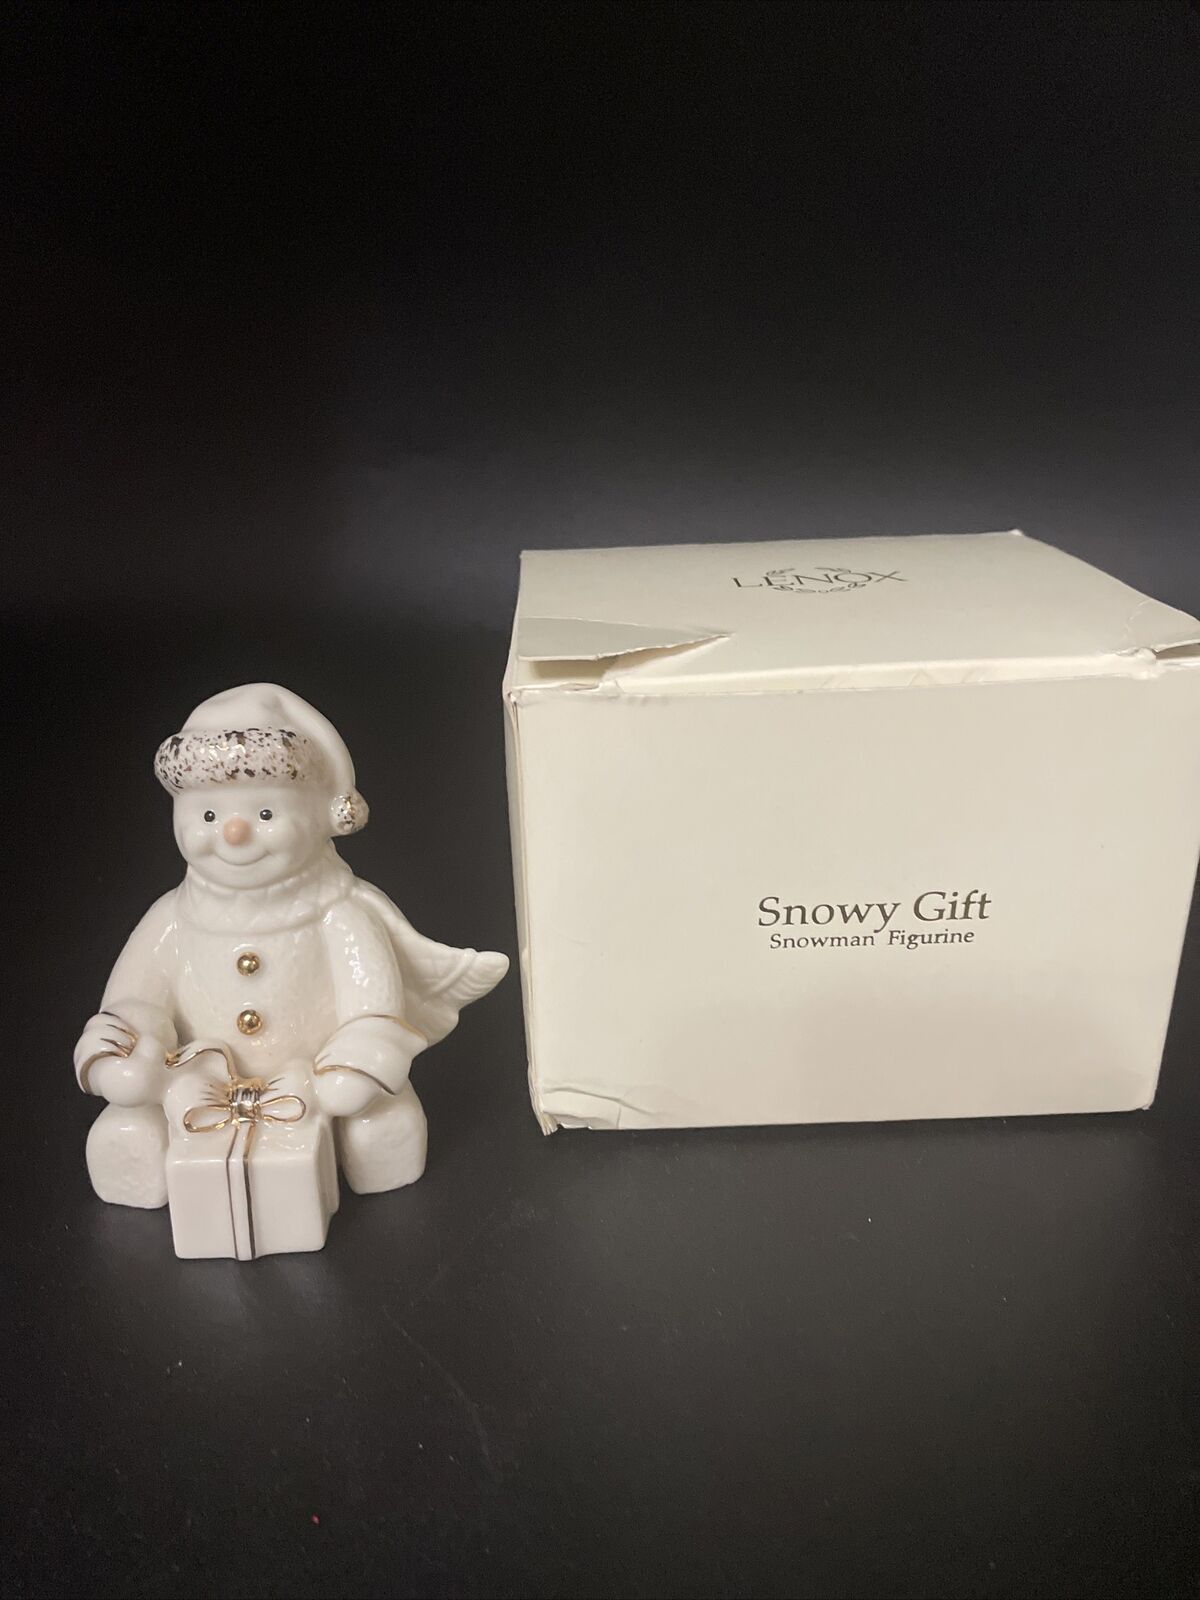 VTG LENOX “Snowy Gift” Snowman Porcel. Handcrafted Figurine Gold Accents-Unused